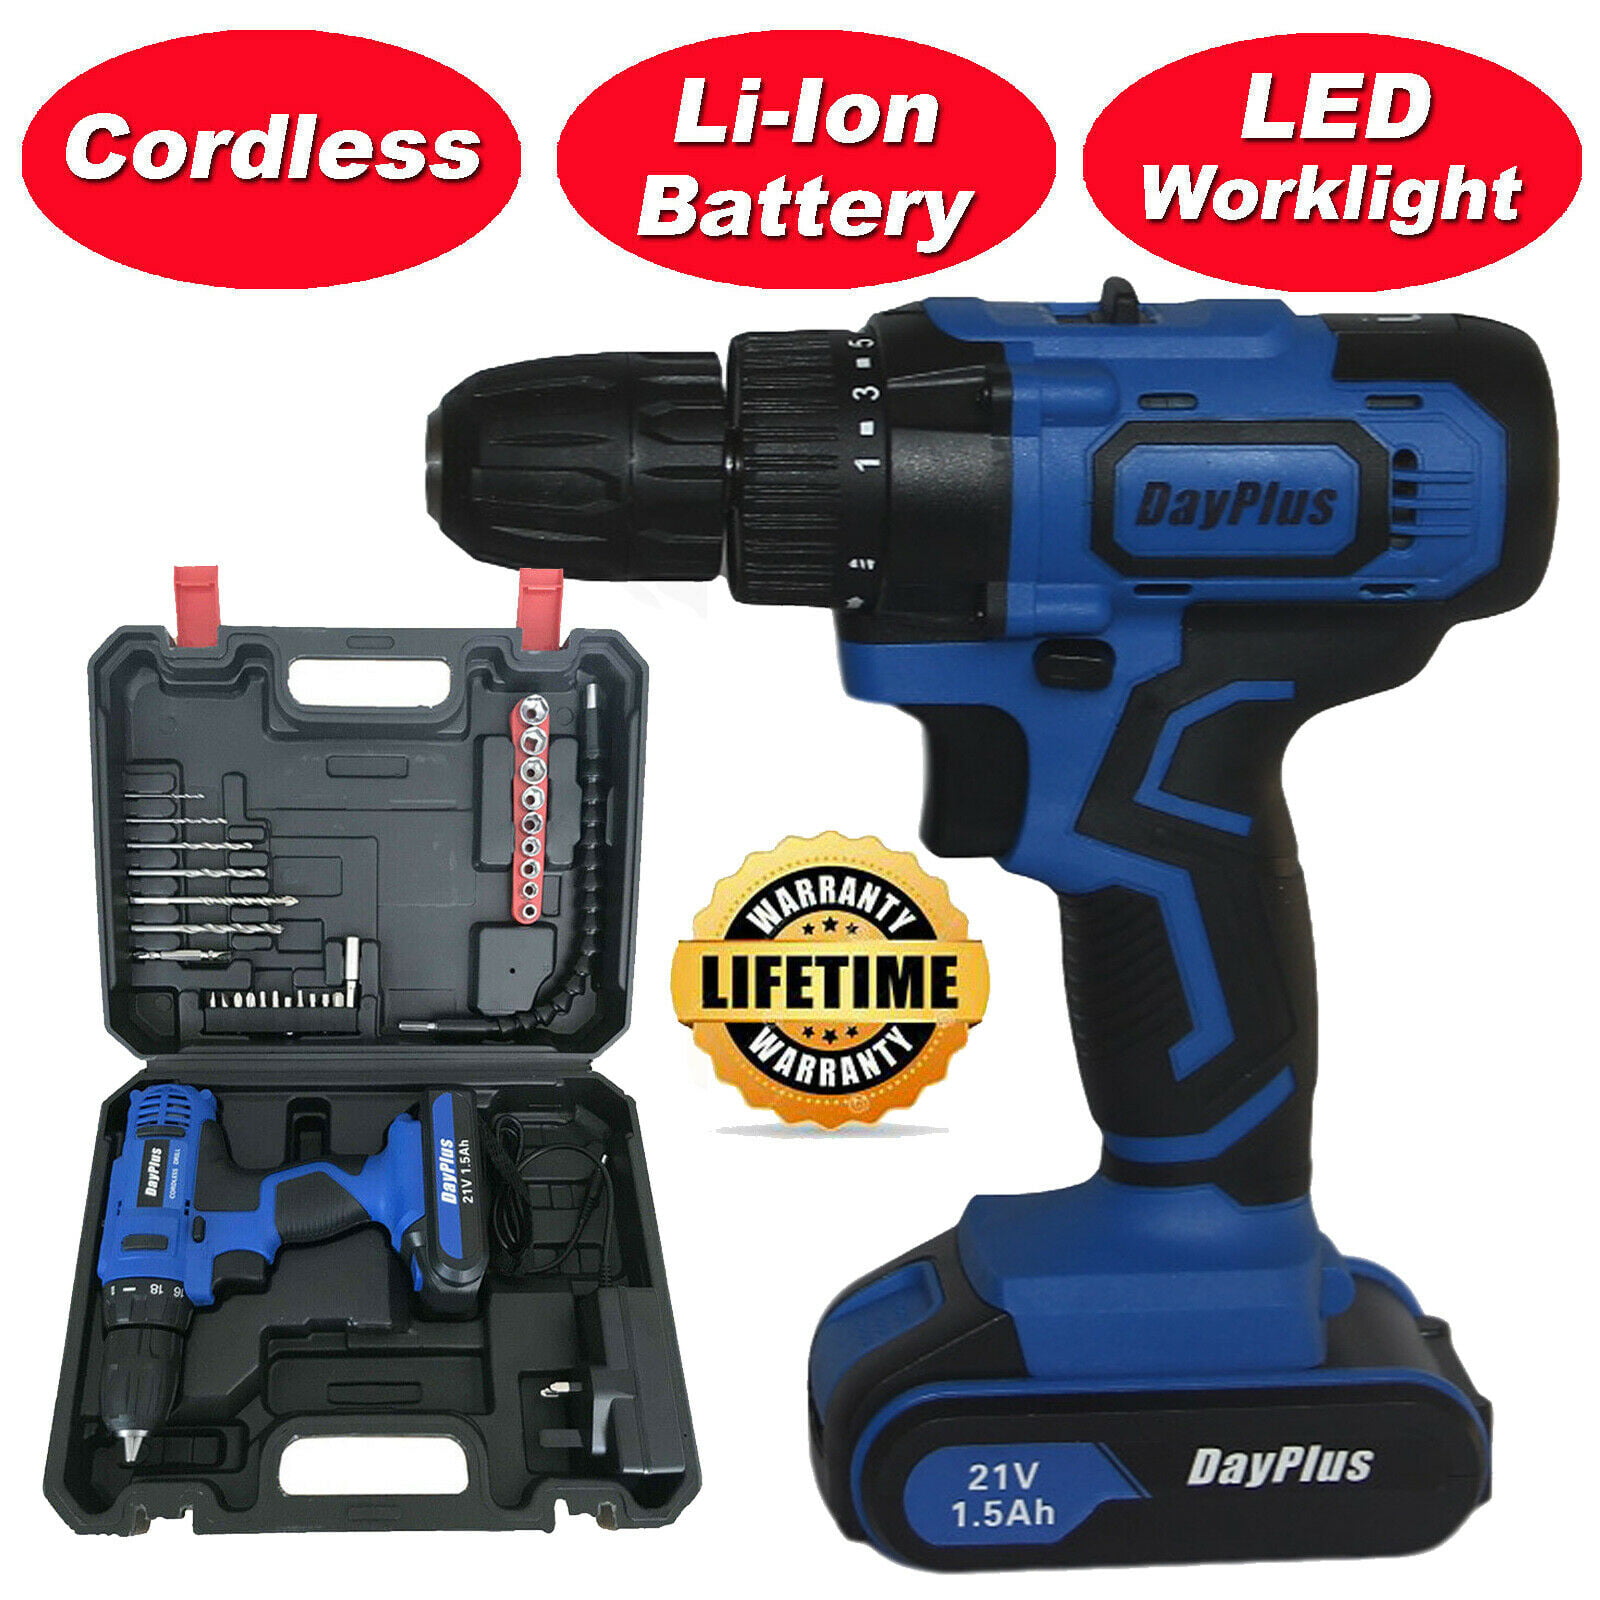 21V Electric Cordless Drill Screwdriver LED Variable Speed 1.5Ah Li-Ion Battery 